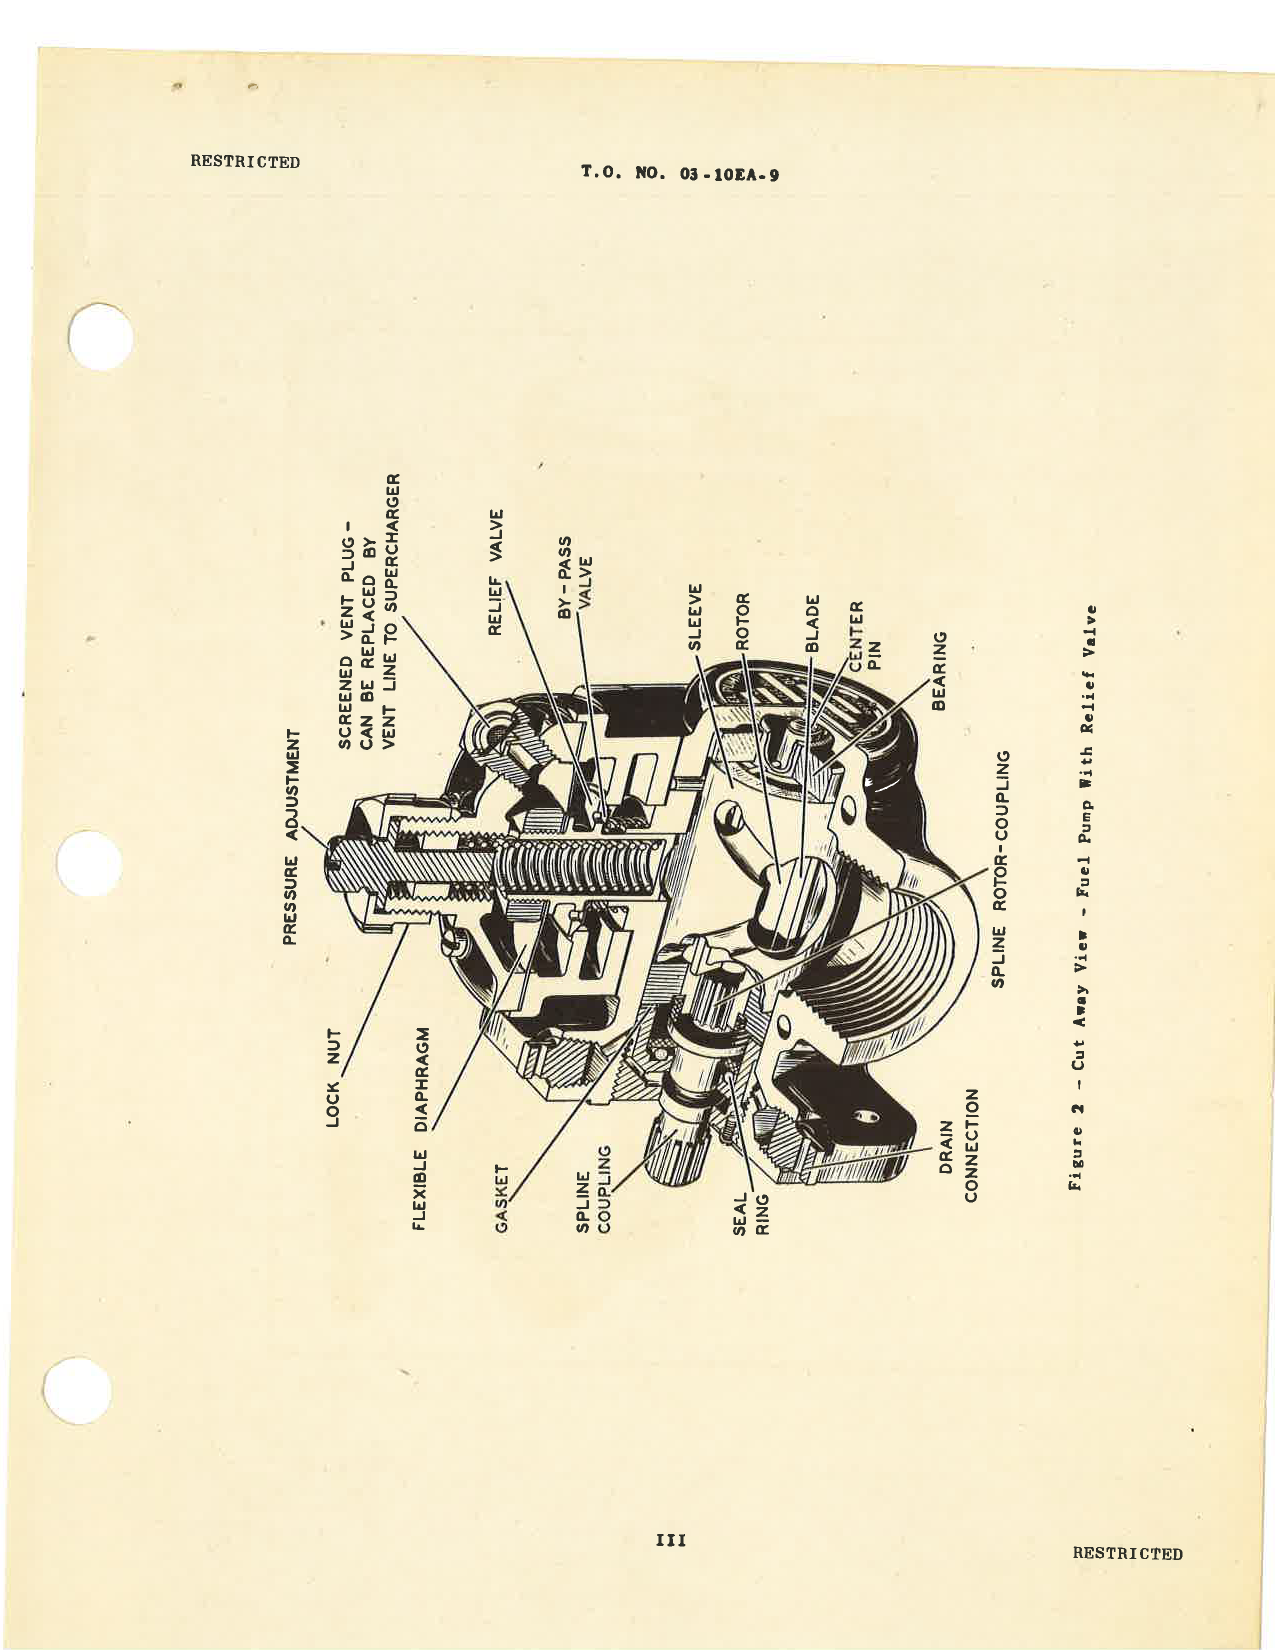 Sample page 5 from AirCorps Library document: Handbook of Instructions with Parts Catalog for Electric Motor Driven Fuel Pumps